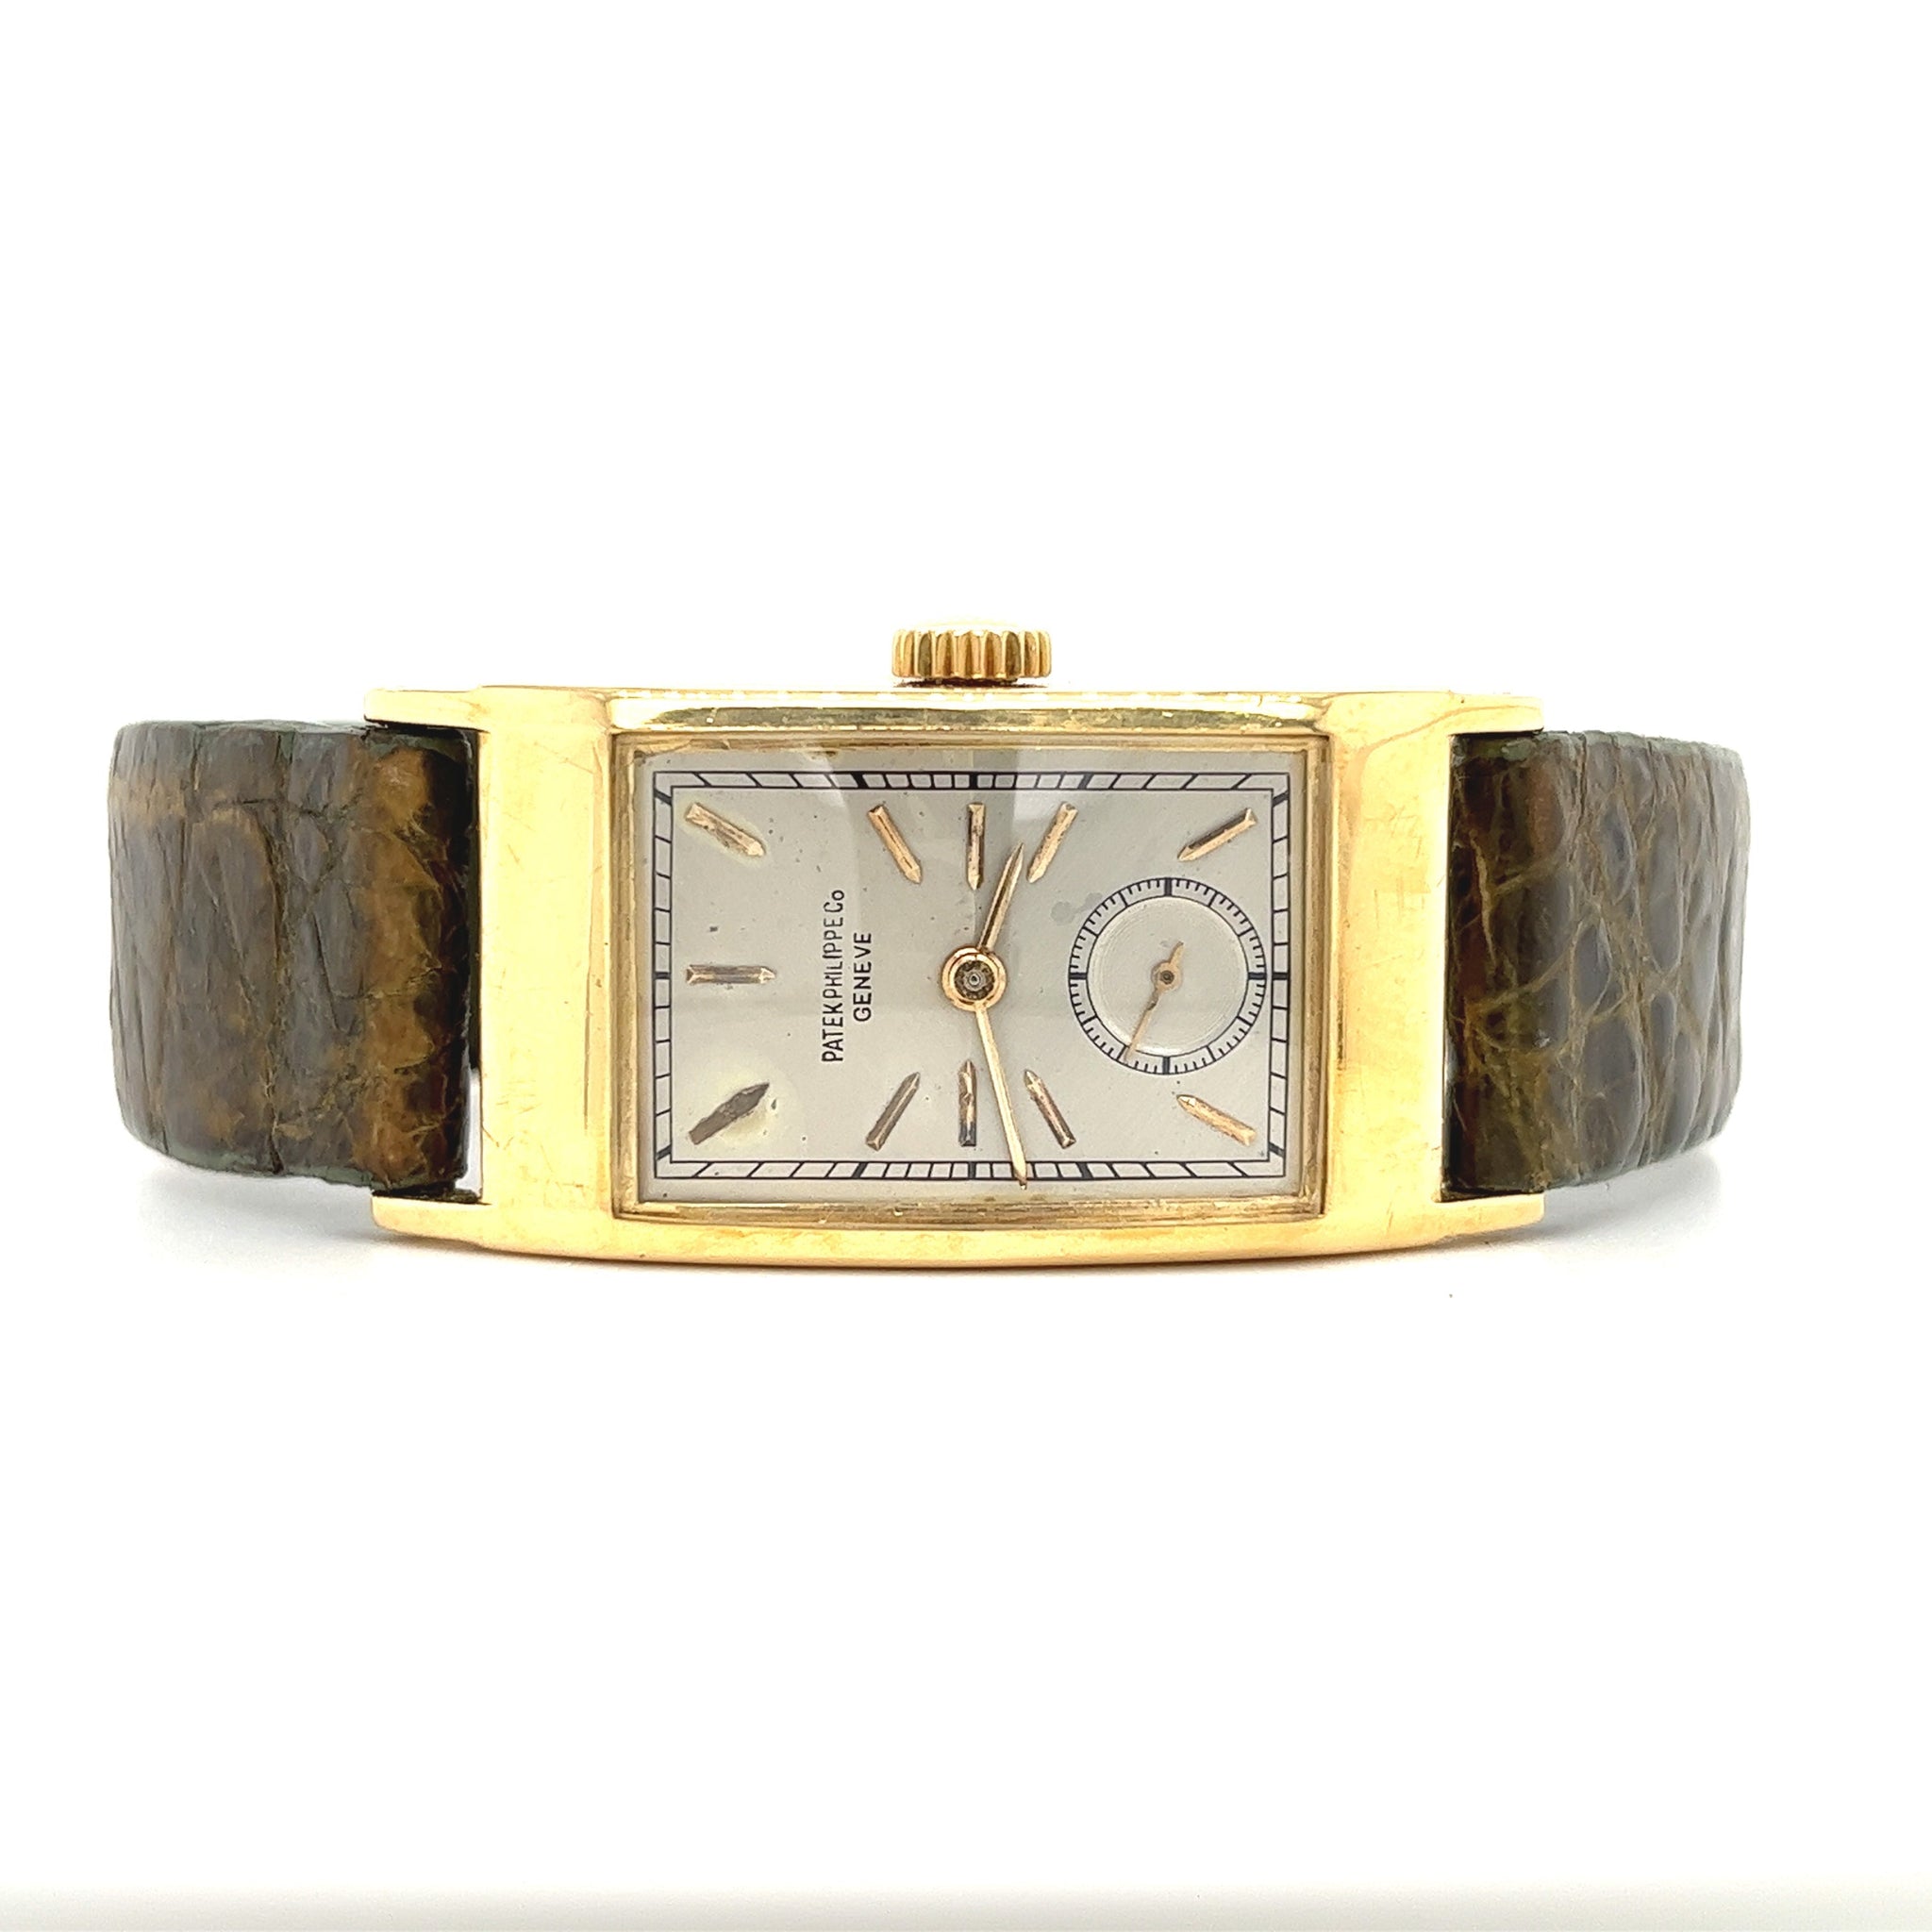 Patek Philippe Chronograph 425J "Tegolino" Watch in 18k Gold with Original box-Watches-ASSAY